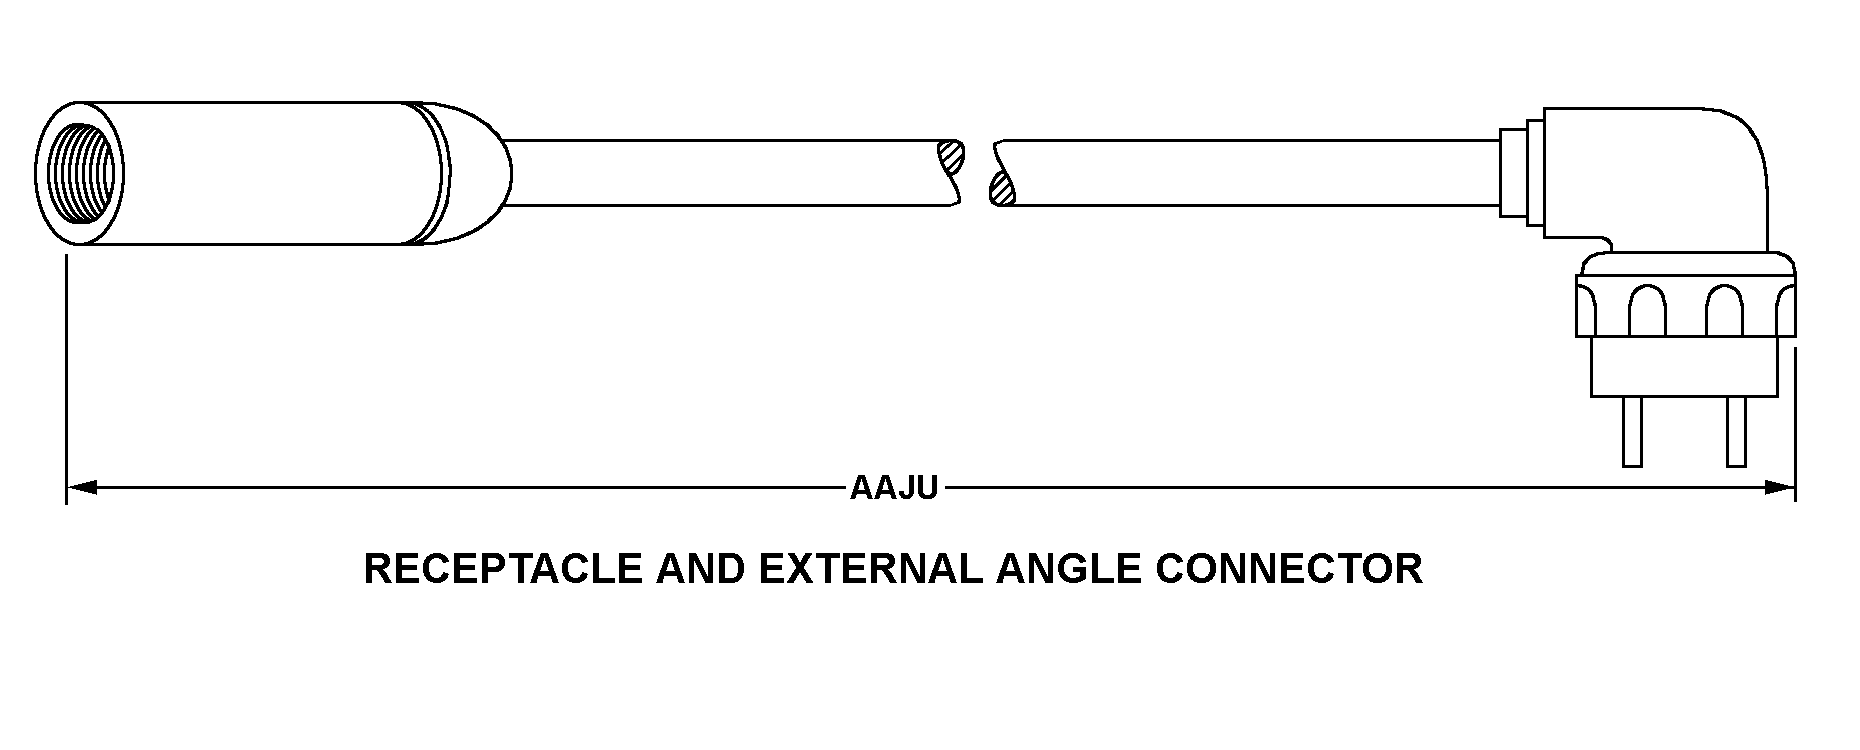 RECEPTACLE AND EXTERNAL ANGLE CONNECTOR style nsn 5995-01-041-9224